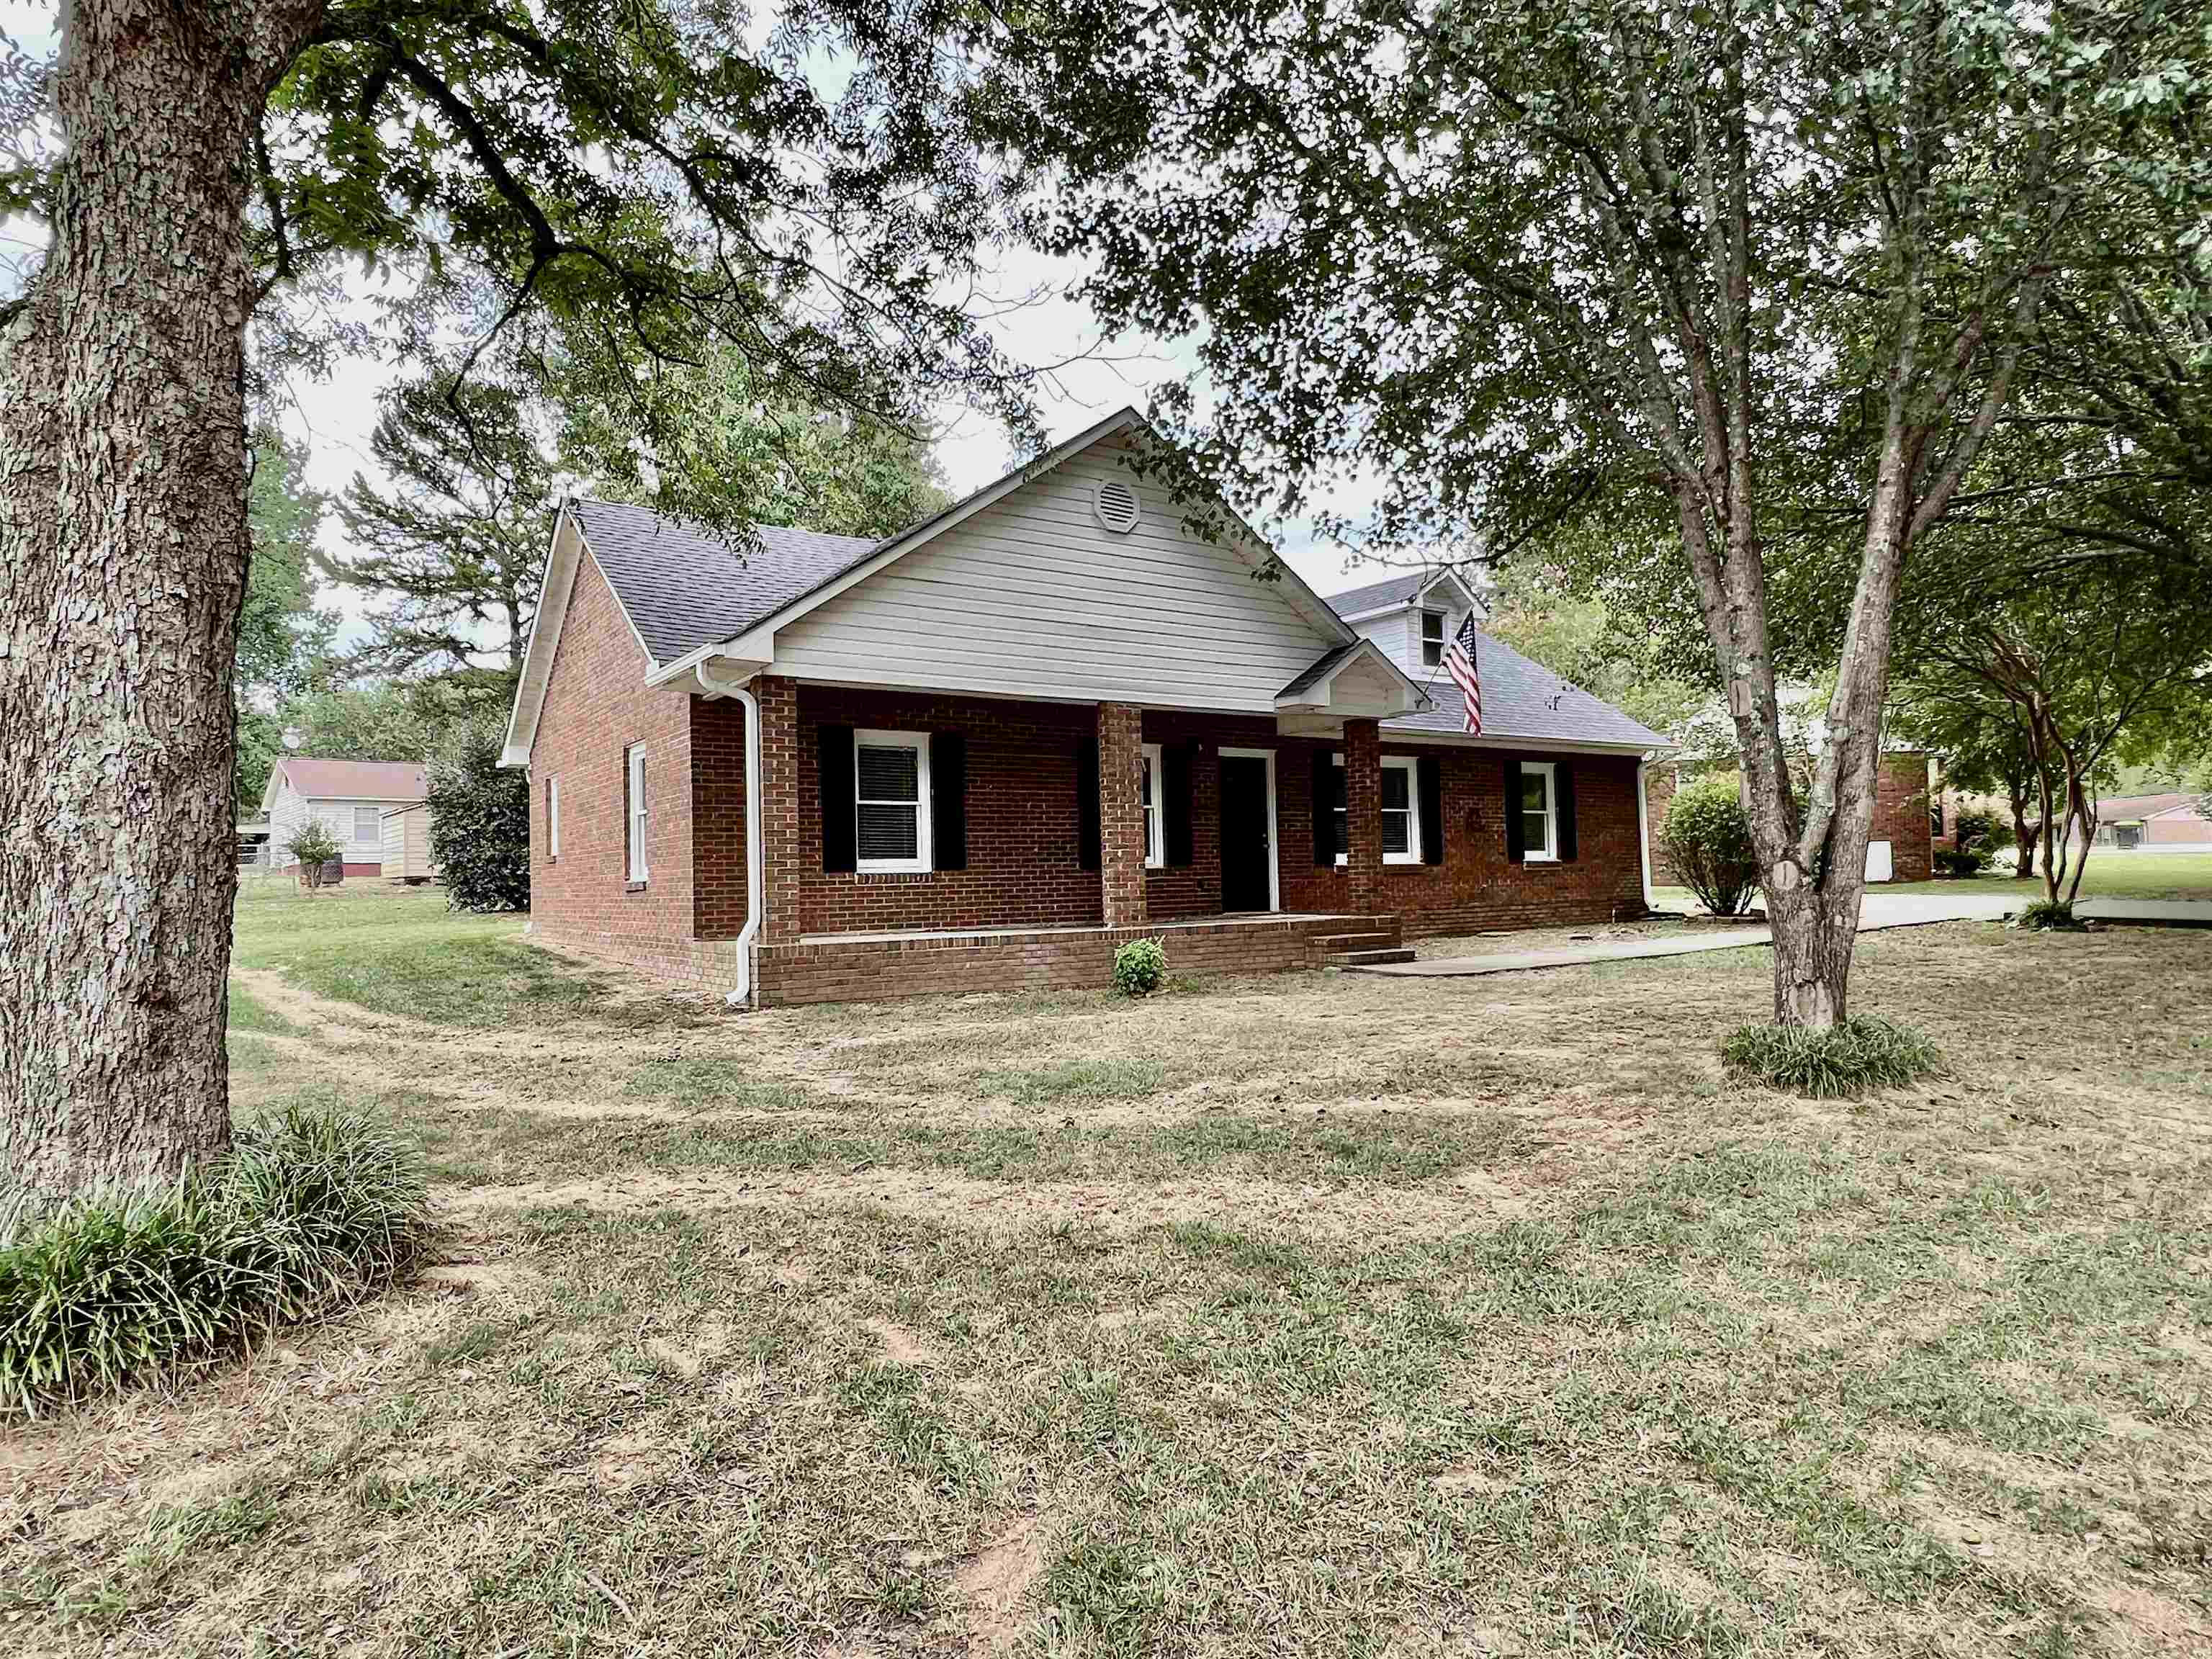 Take a look at this beautiful brick ranch home in the sought after District 6 School District.  This home has been completely remodeled on the inside.  It has new flooring throughout, updated stainless appliances, freshly painted walls, on top of all that all new lighting.  Some of the highlighted features are a good size front porch, separate dining area, split floor plan, storage building, good size closets, and a walk-in laundry room.  This home has also had insulation upgraded to Icynene Spray foam insulation.  This will basically guarantee a more comfortable environment and drastically reduced power bills.  Don't waste time on this home, you might miss out!!